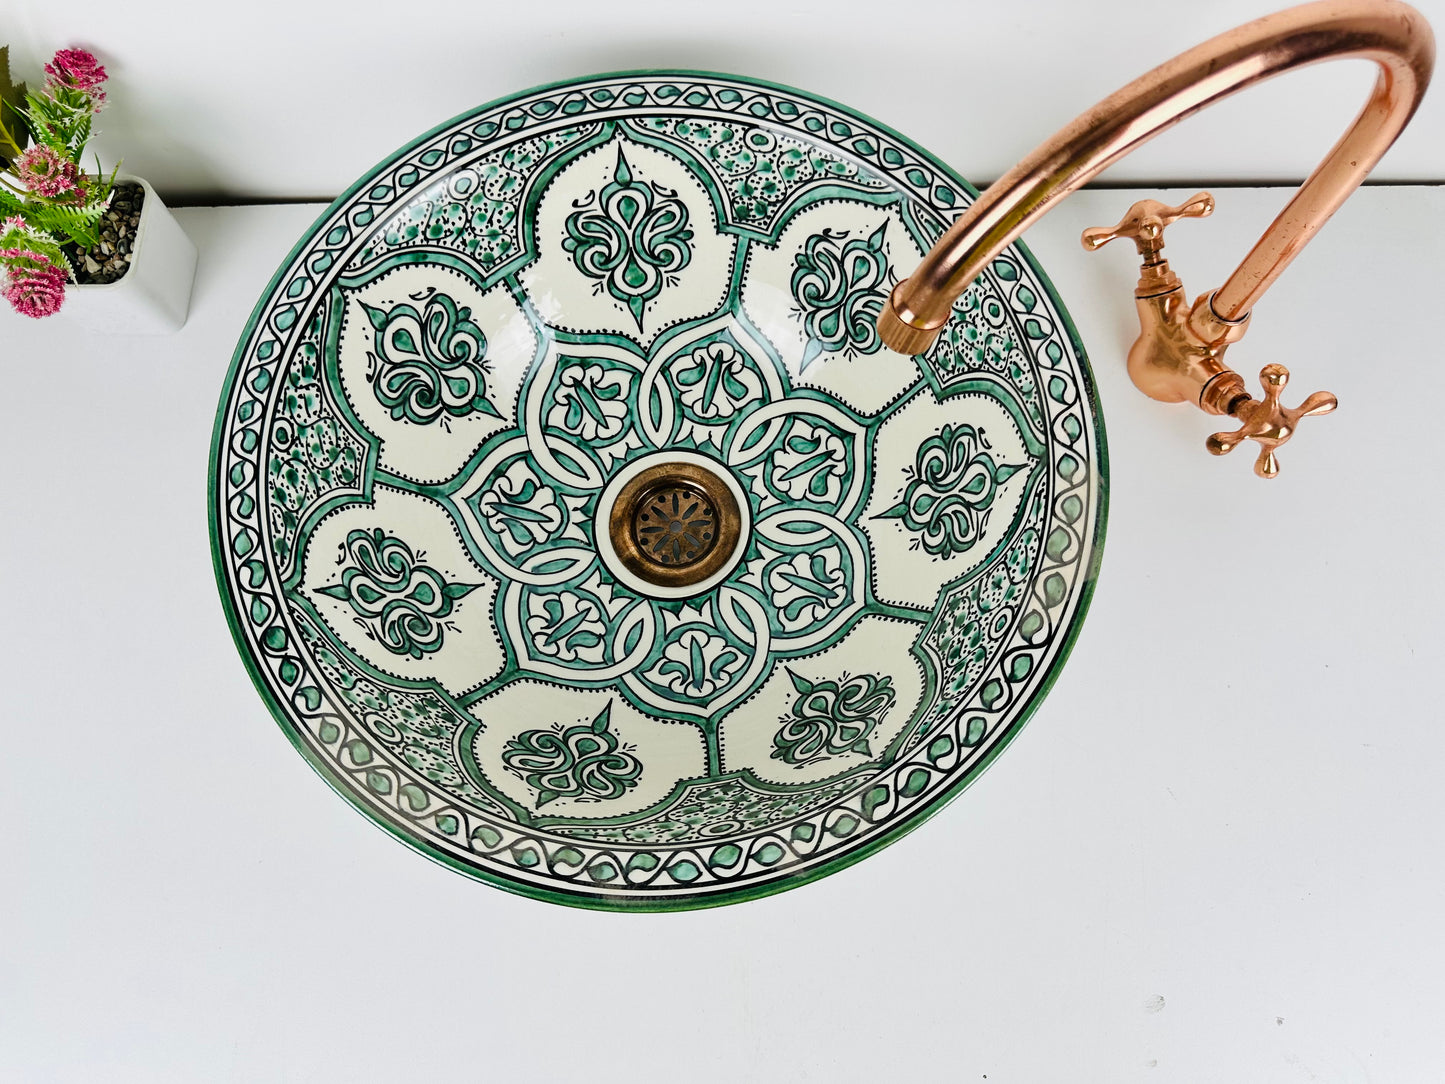 Moroccan Meadow: Handcrafted Ceramic Sink with Traditional Green Moroccan Design